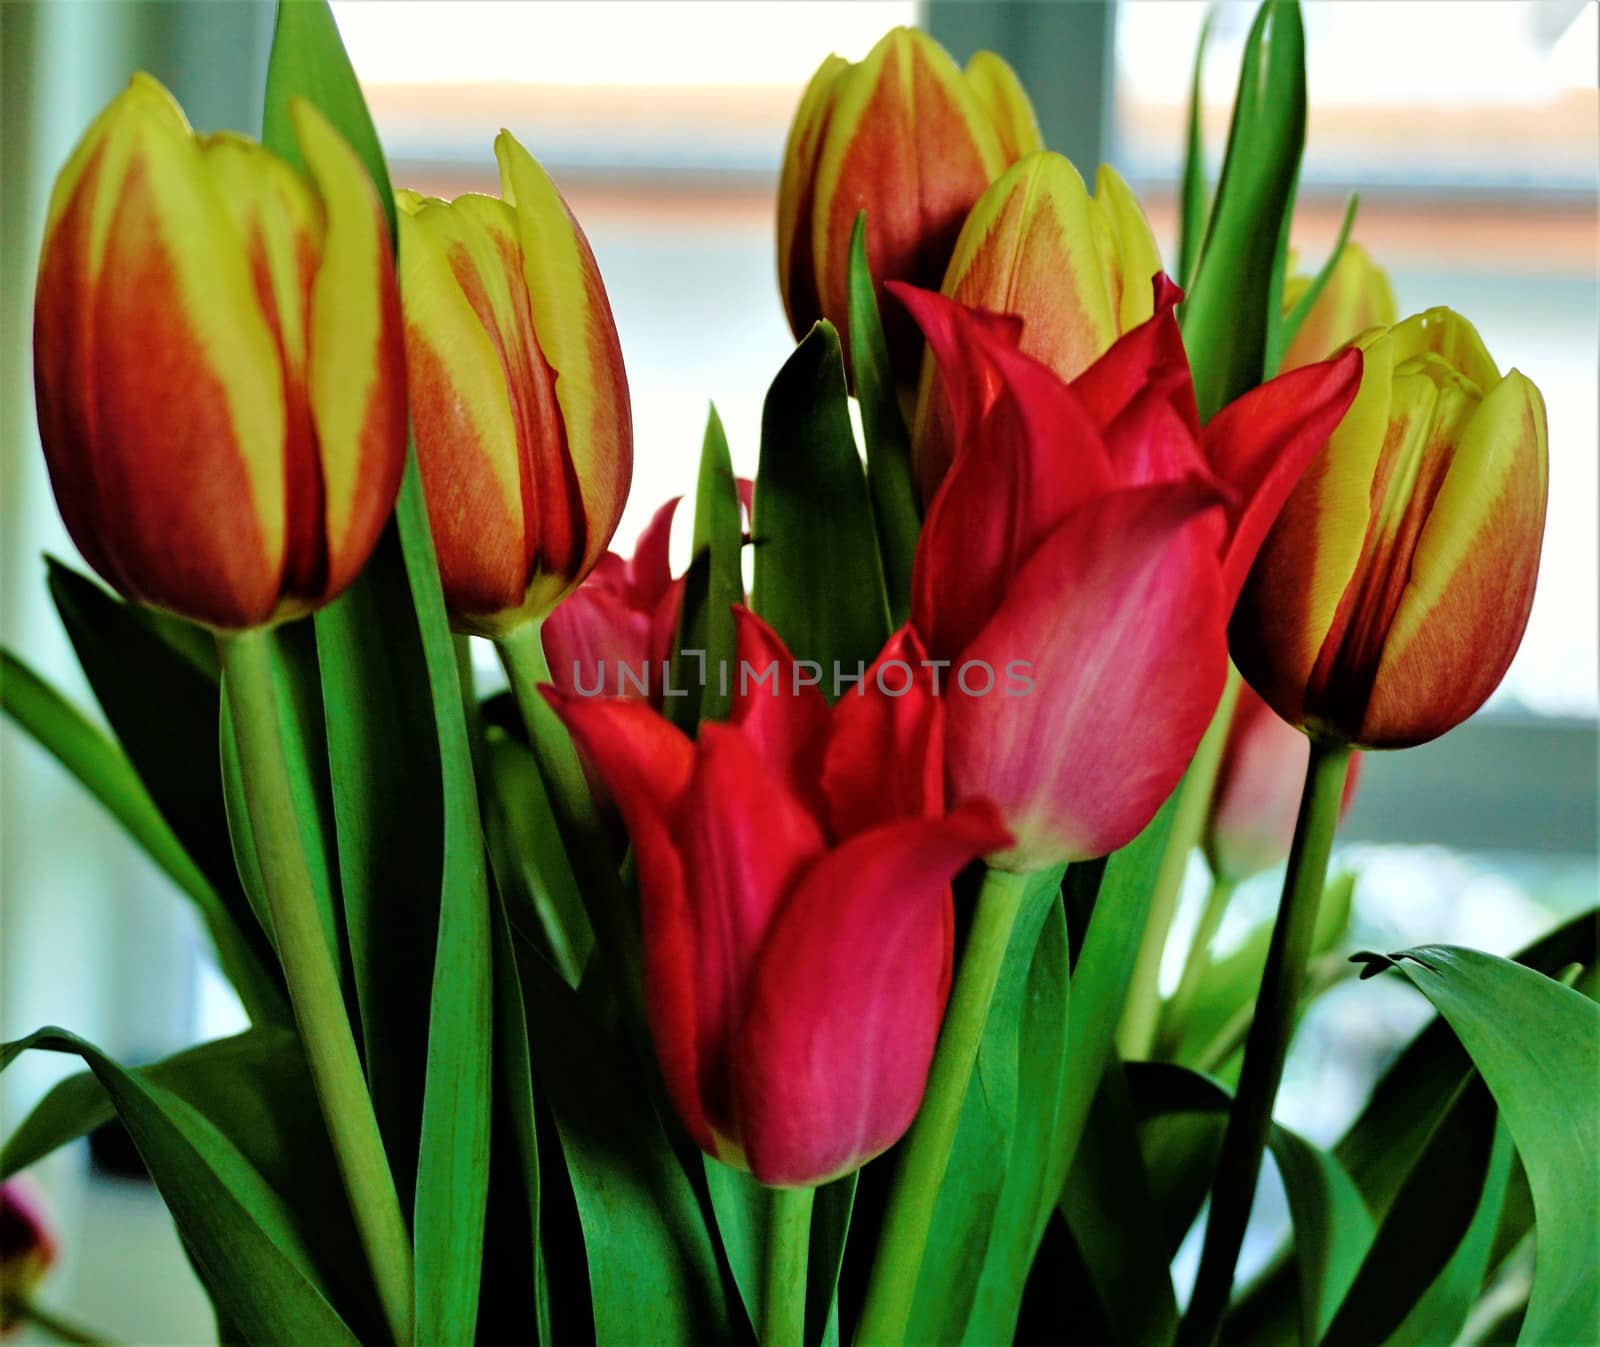 Bunch of colorful tulips in front of window